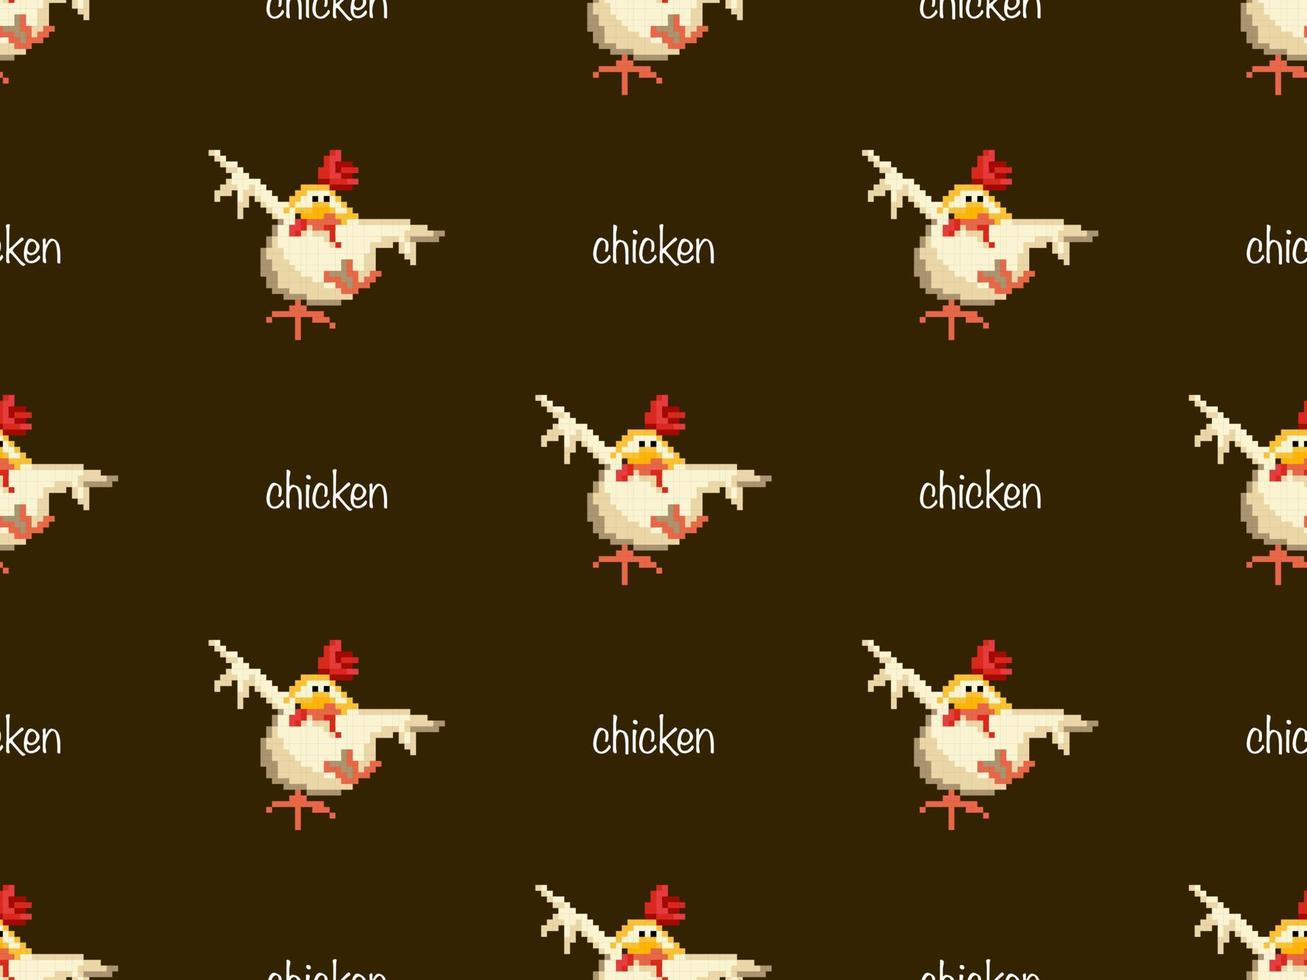 Chicken cartoon character seamless pattern on brown background. Pixel style vector